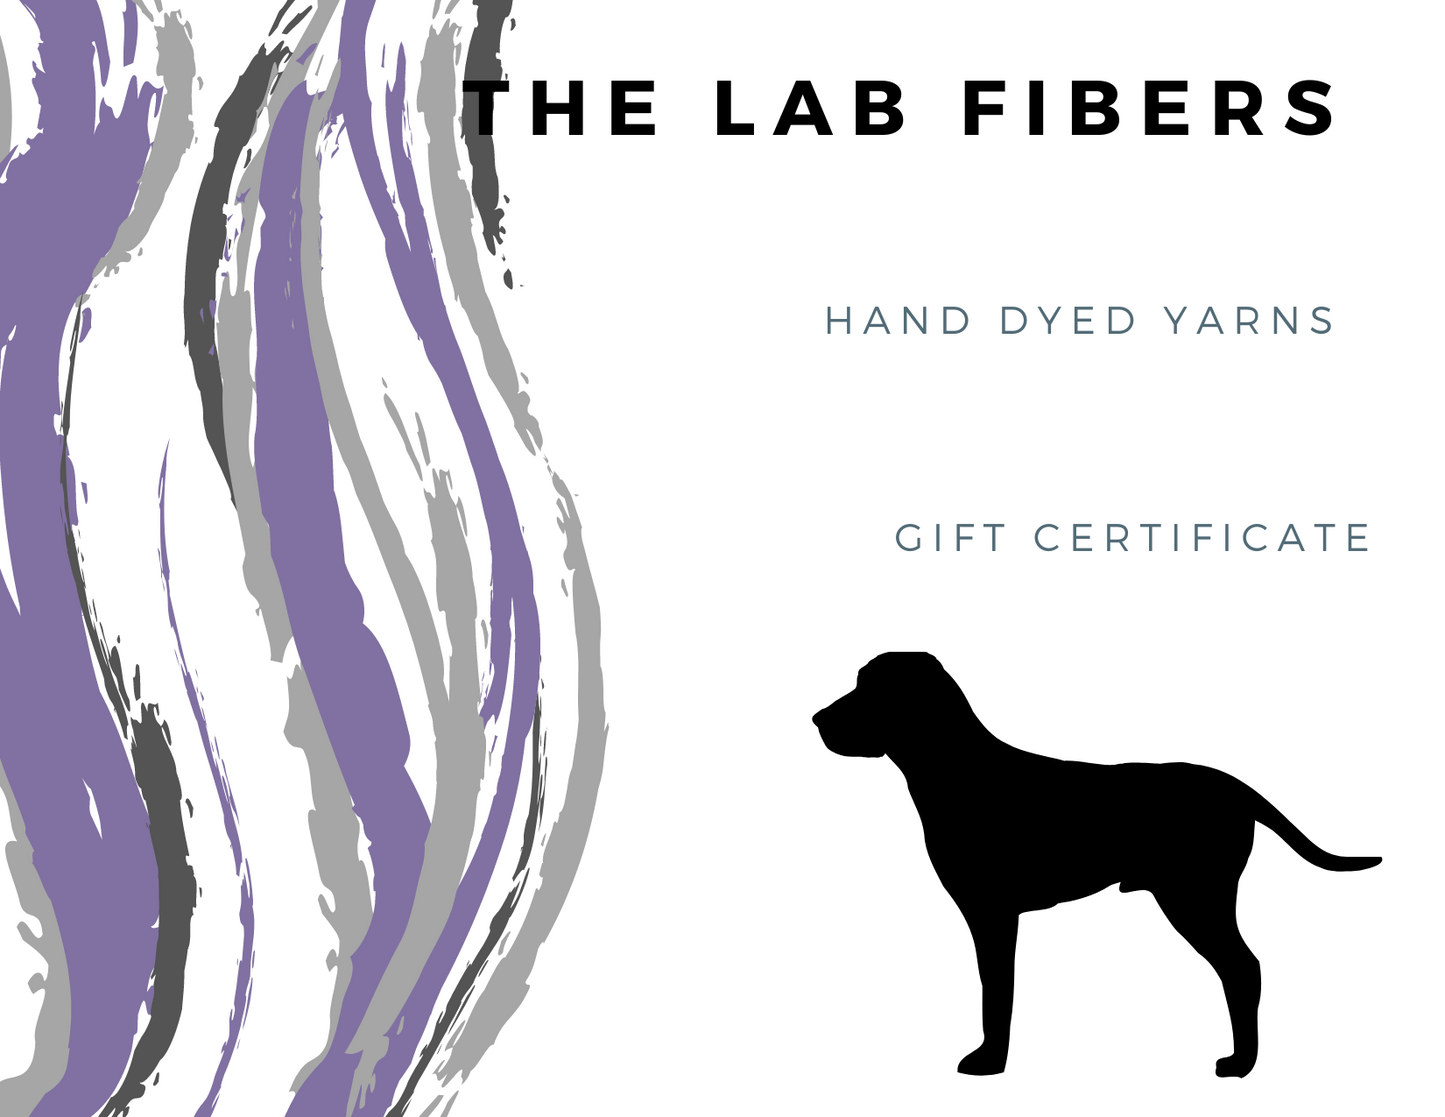 The Lab Fibers Gift Certificate